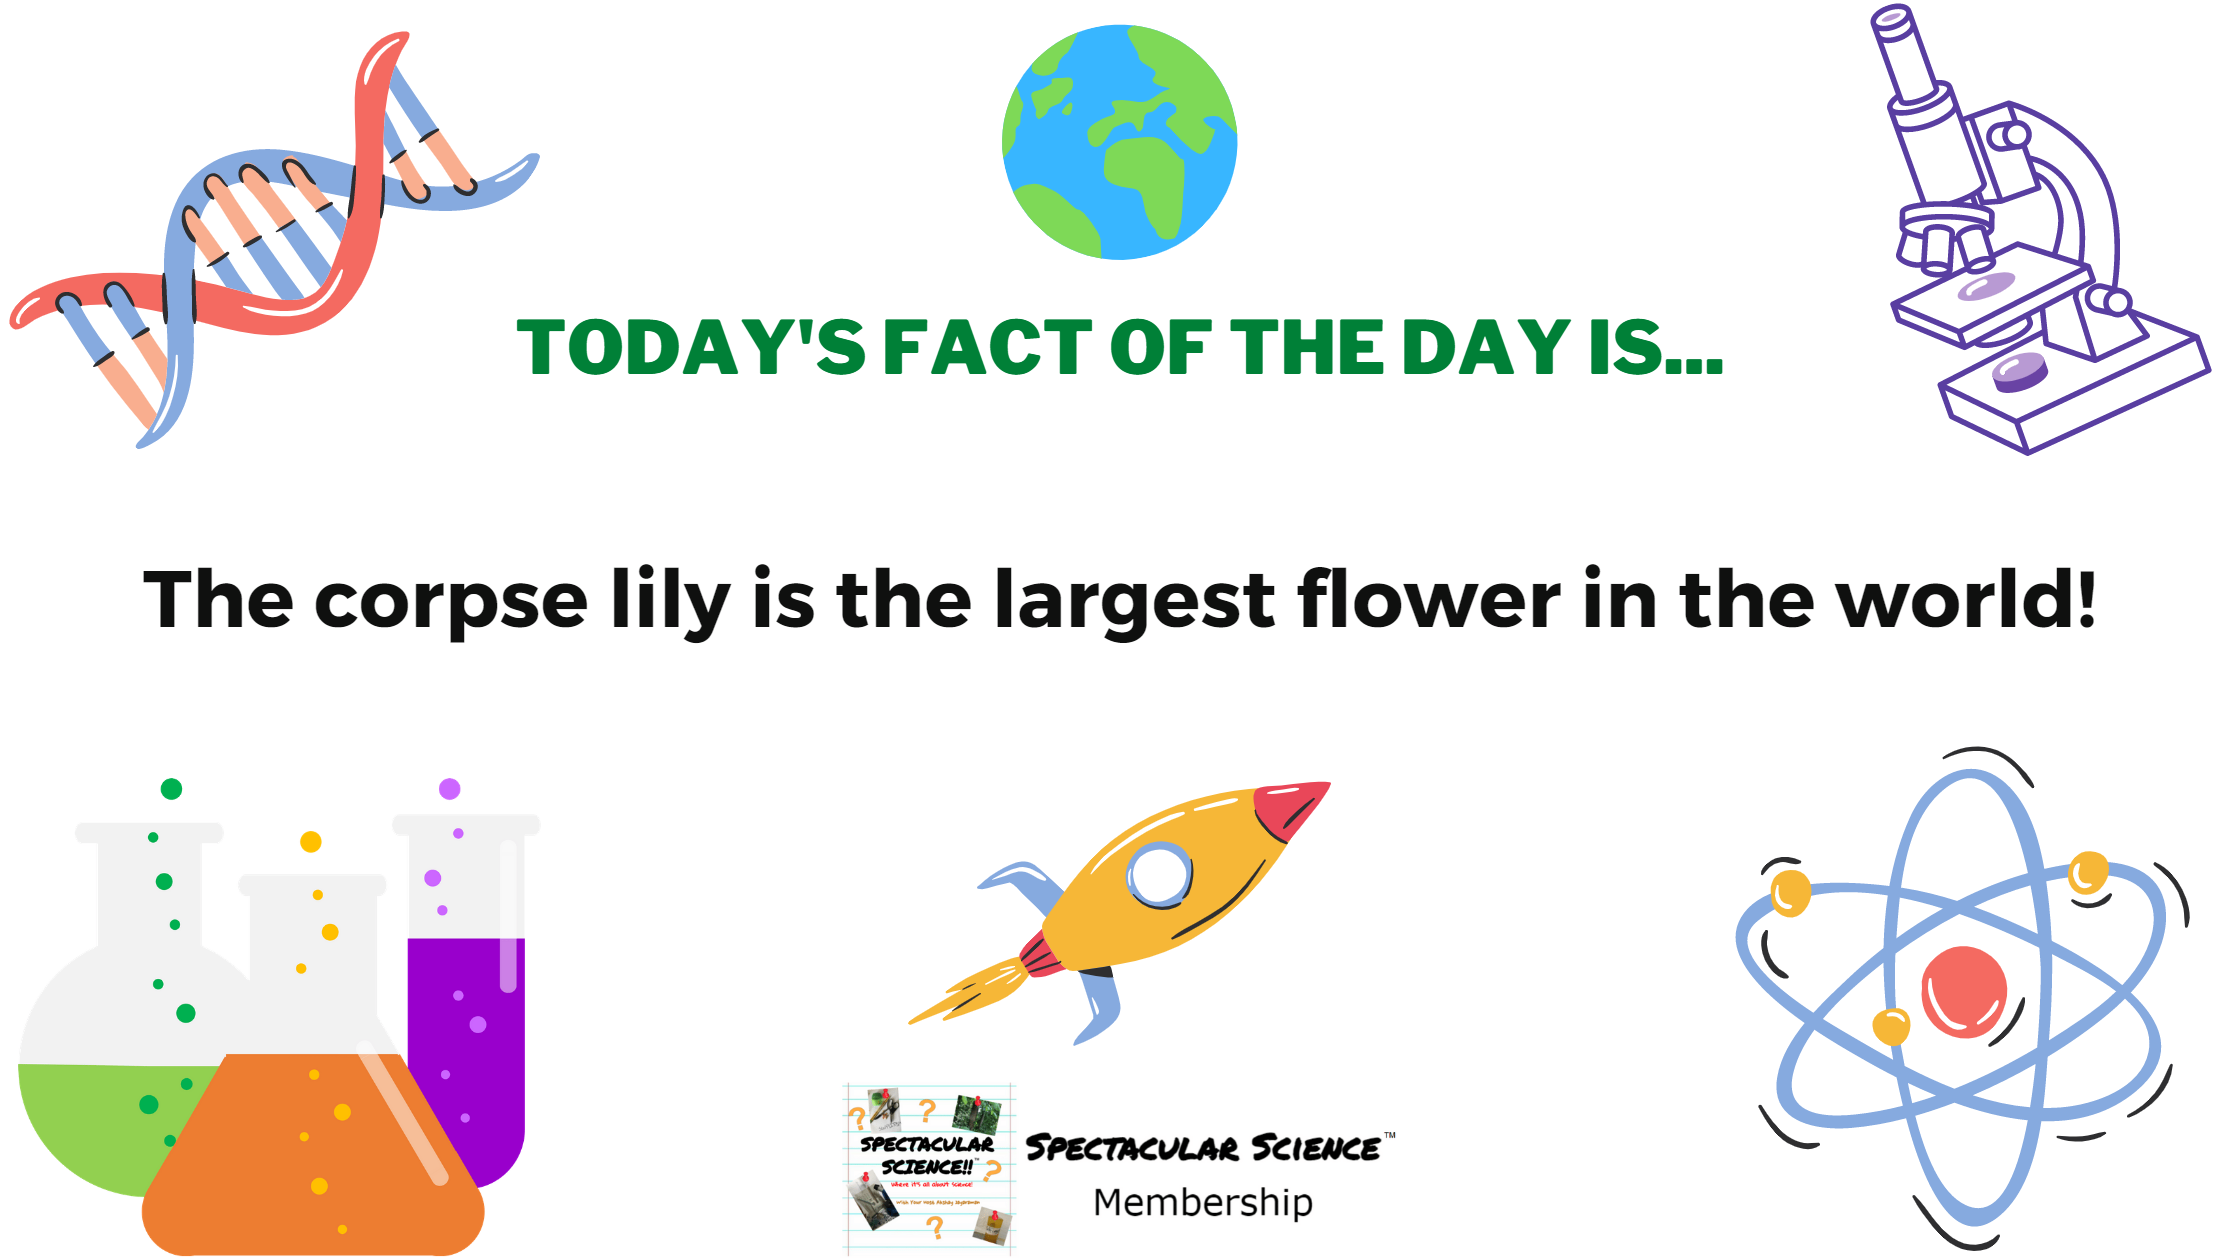 Fact of the Day Image February 13th